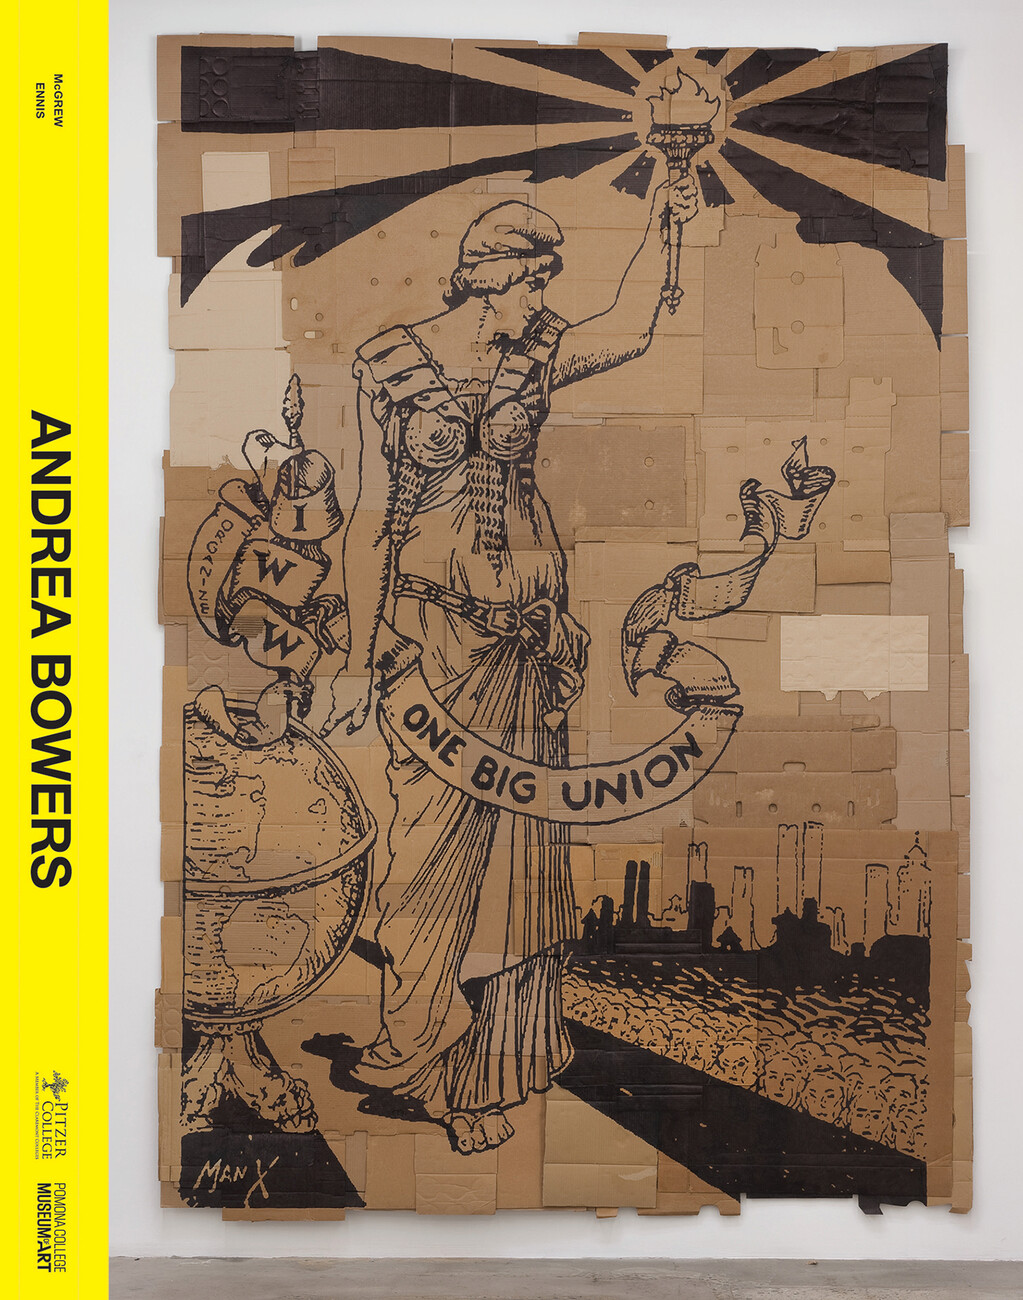 Catalogue cover for Andrea Bowers exhibition showing illustration on cardboard of heroine holding up torch with banner One Big Union